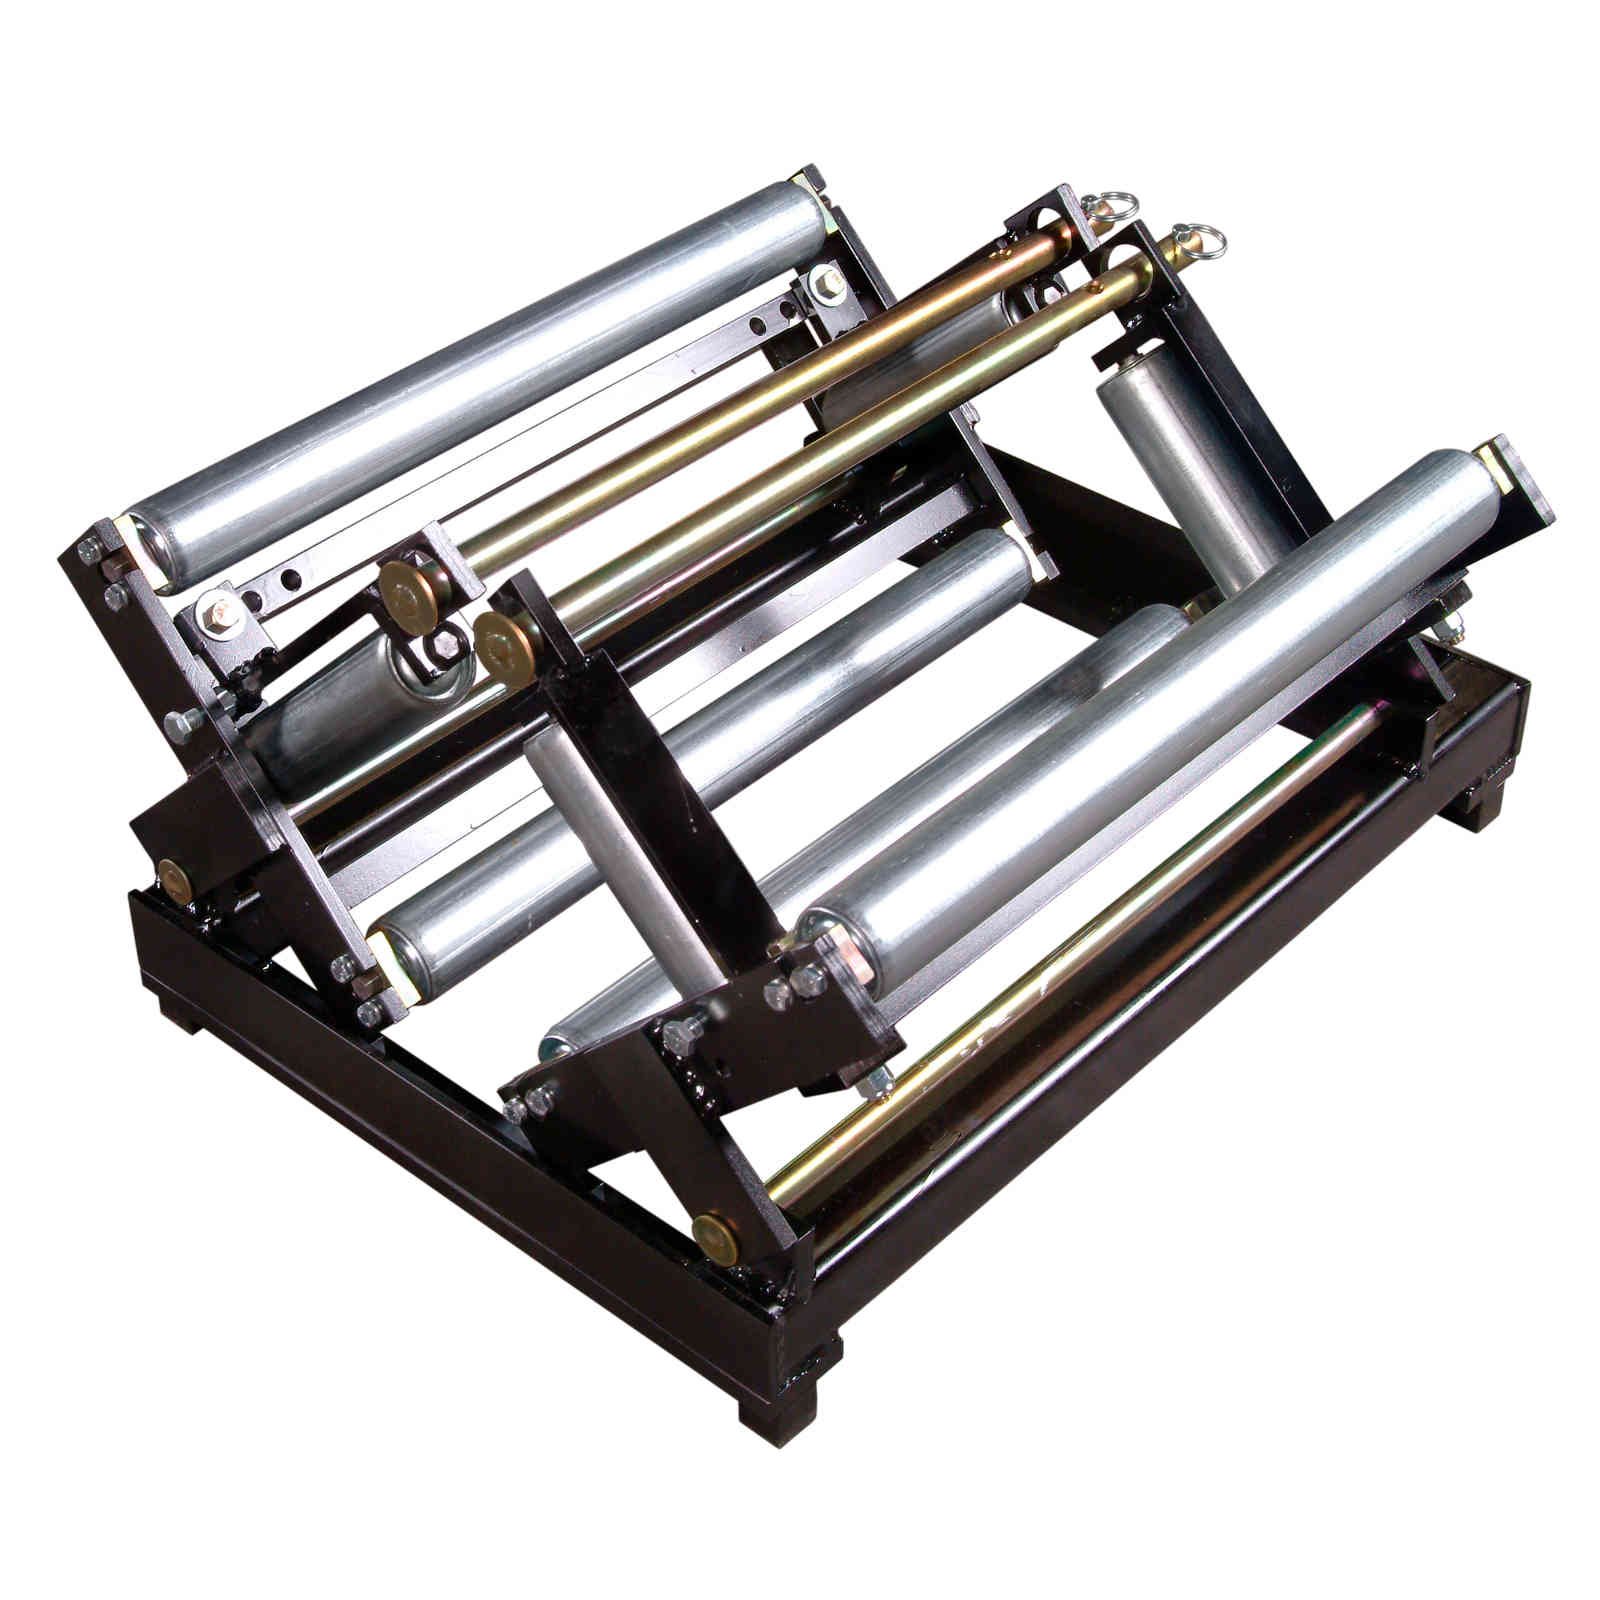 New Tech 5" or 6" Machine Coil Cradle